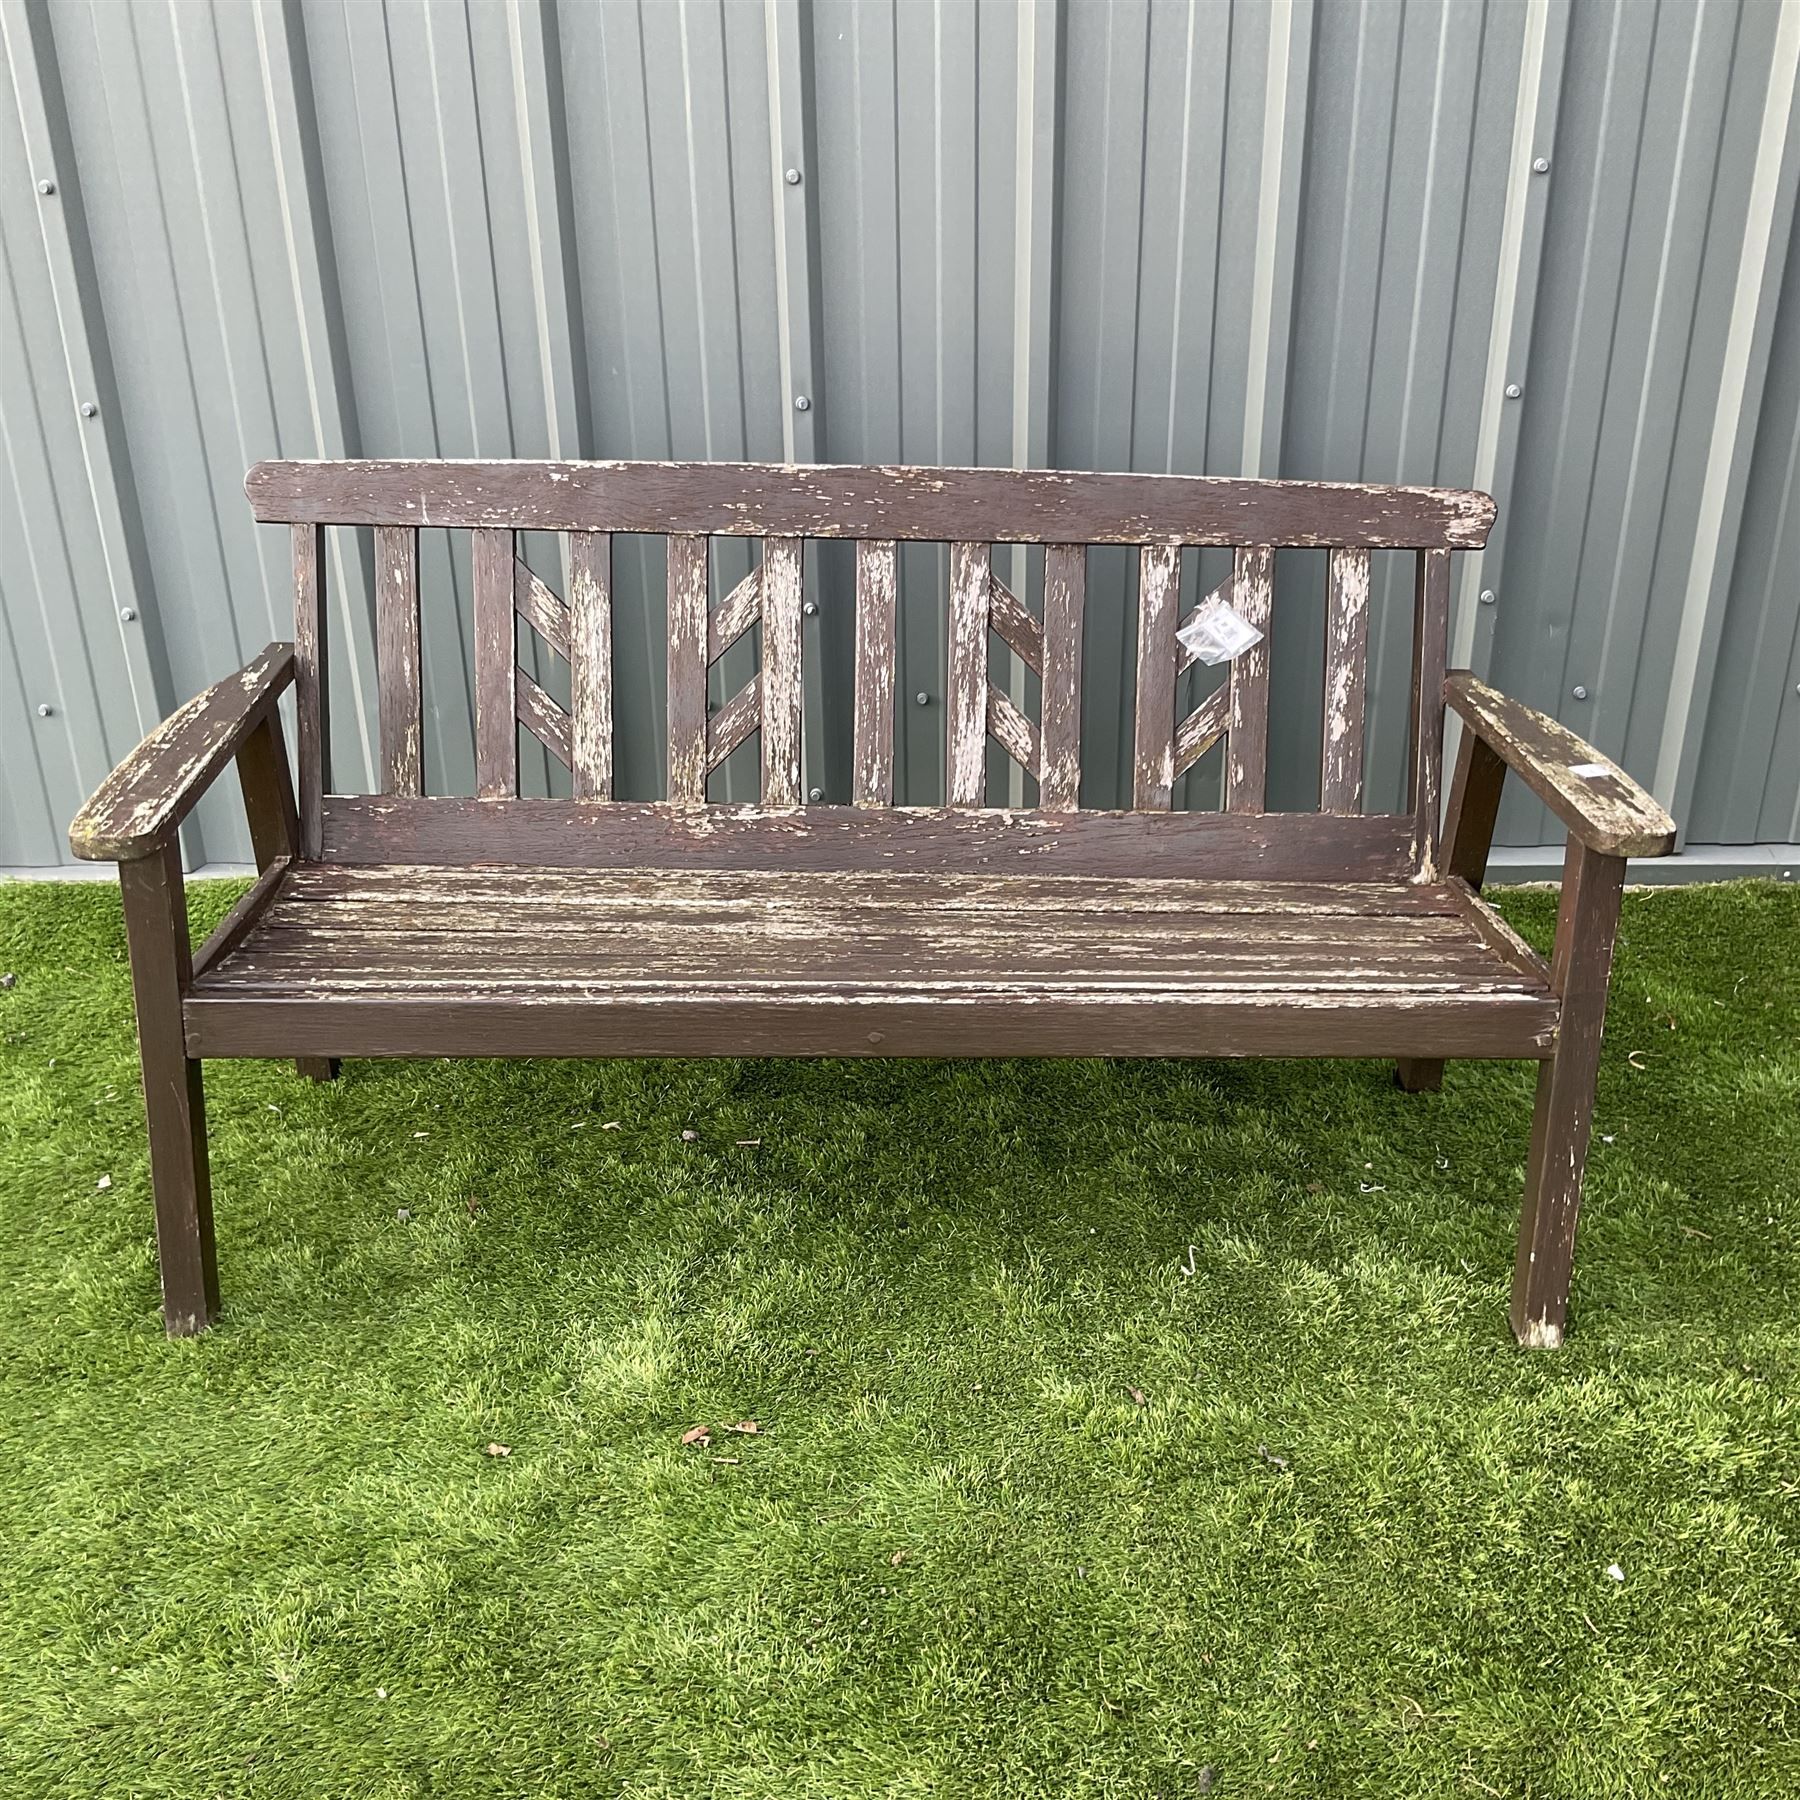 Brown painted plank bench